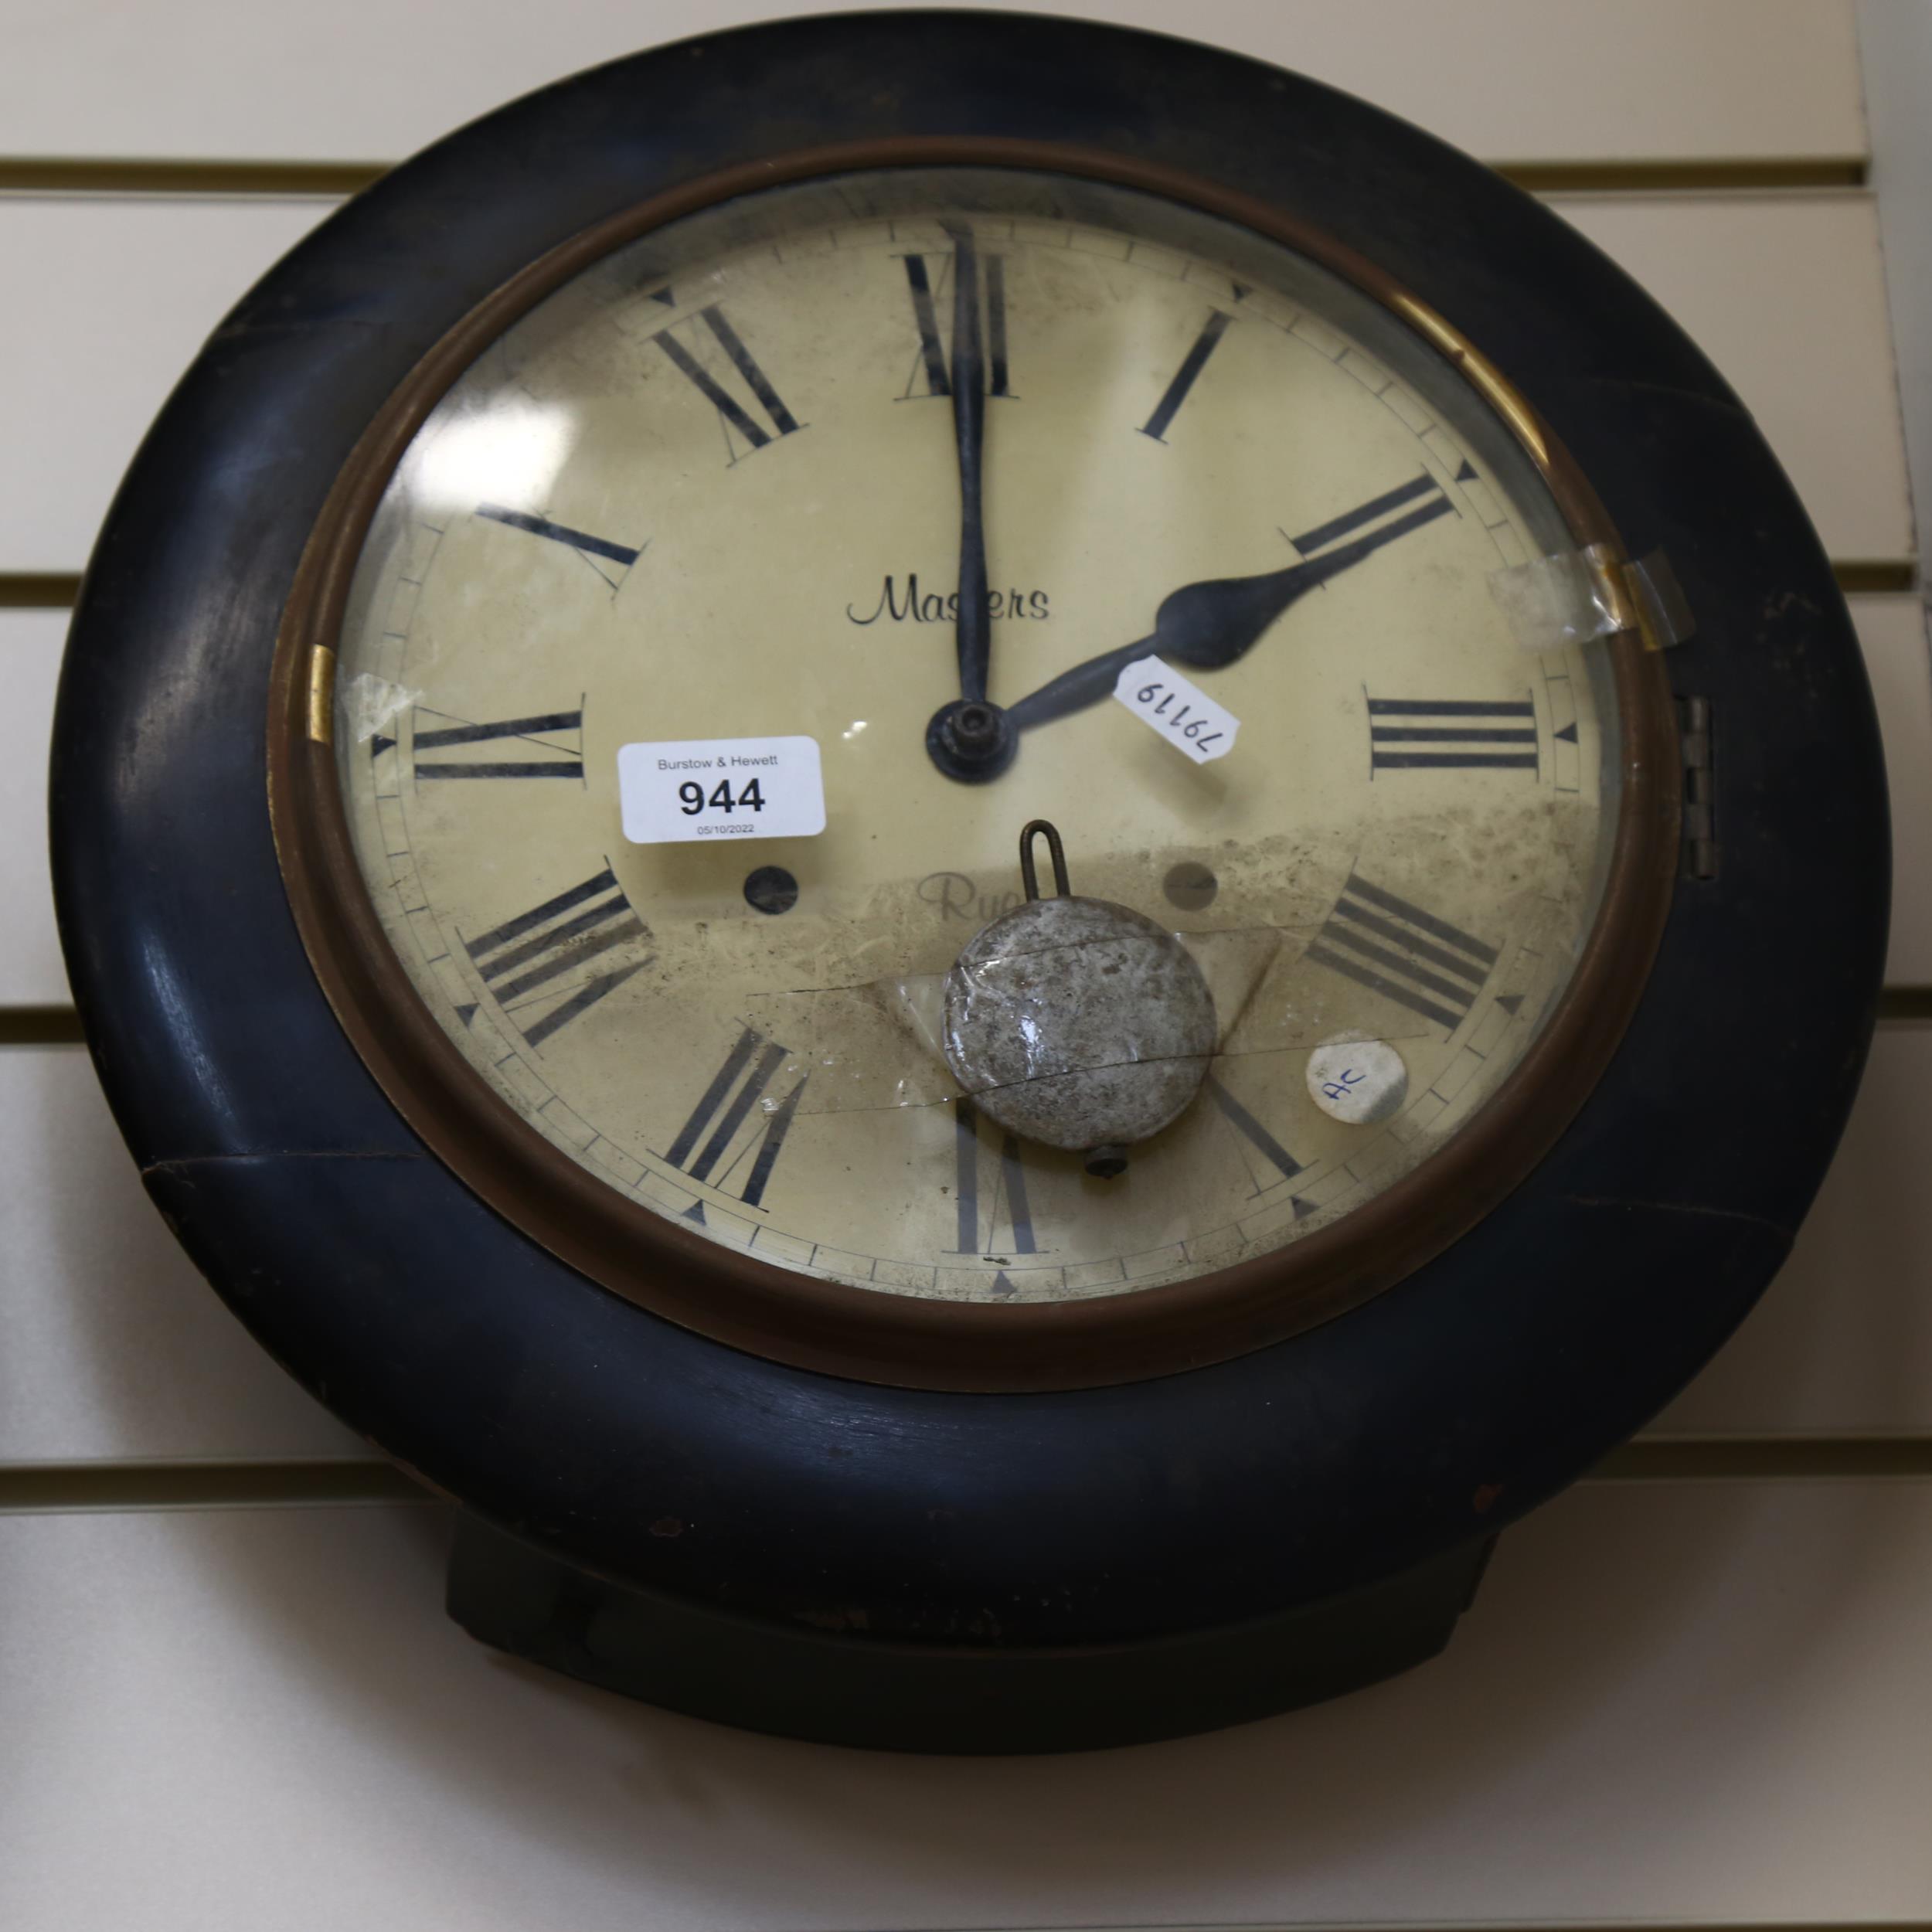 MASTERS OF RYE - an early 20th century 8-day dial wall clock, with pendulum but no key, case width - Bild 2 aus 2